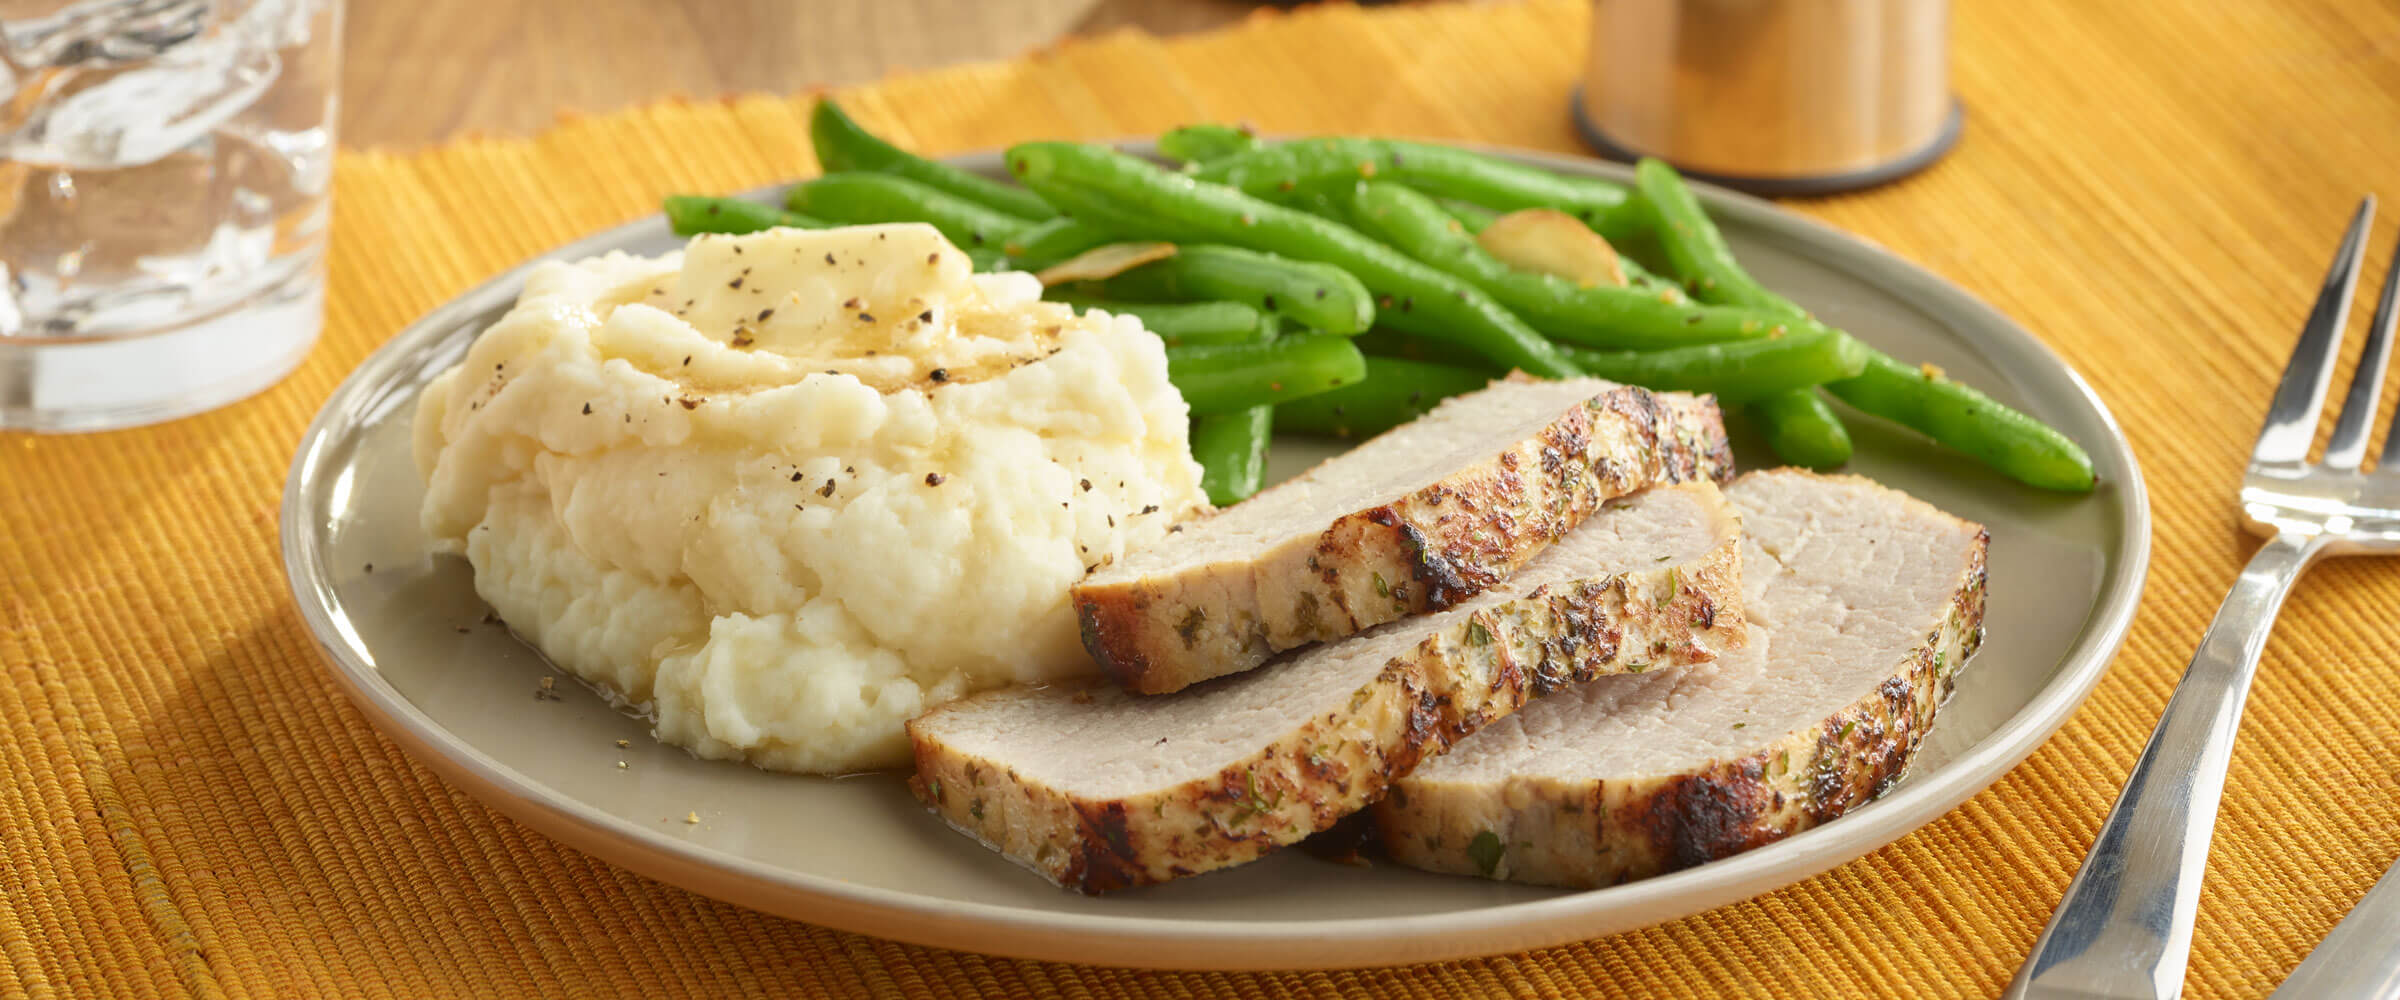 Pork Loin Filet and Mashed Potatoes with green beans on plate on orange placemat